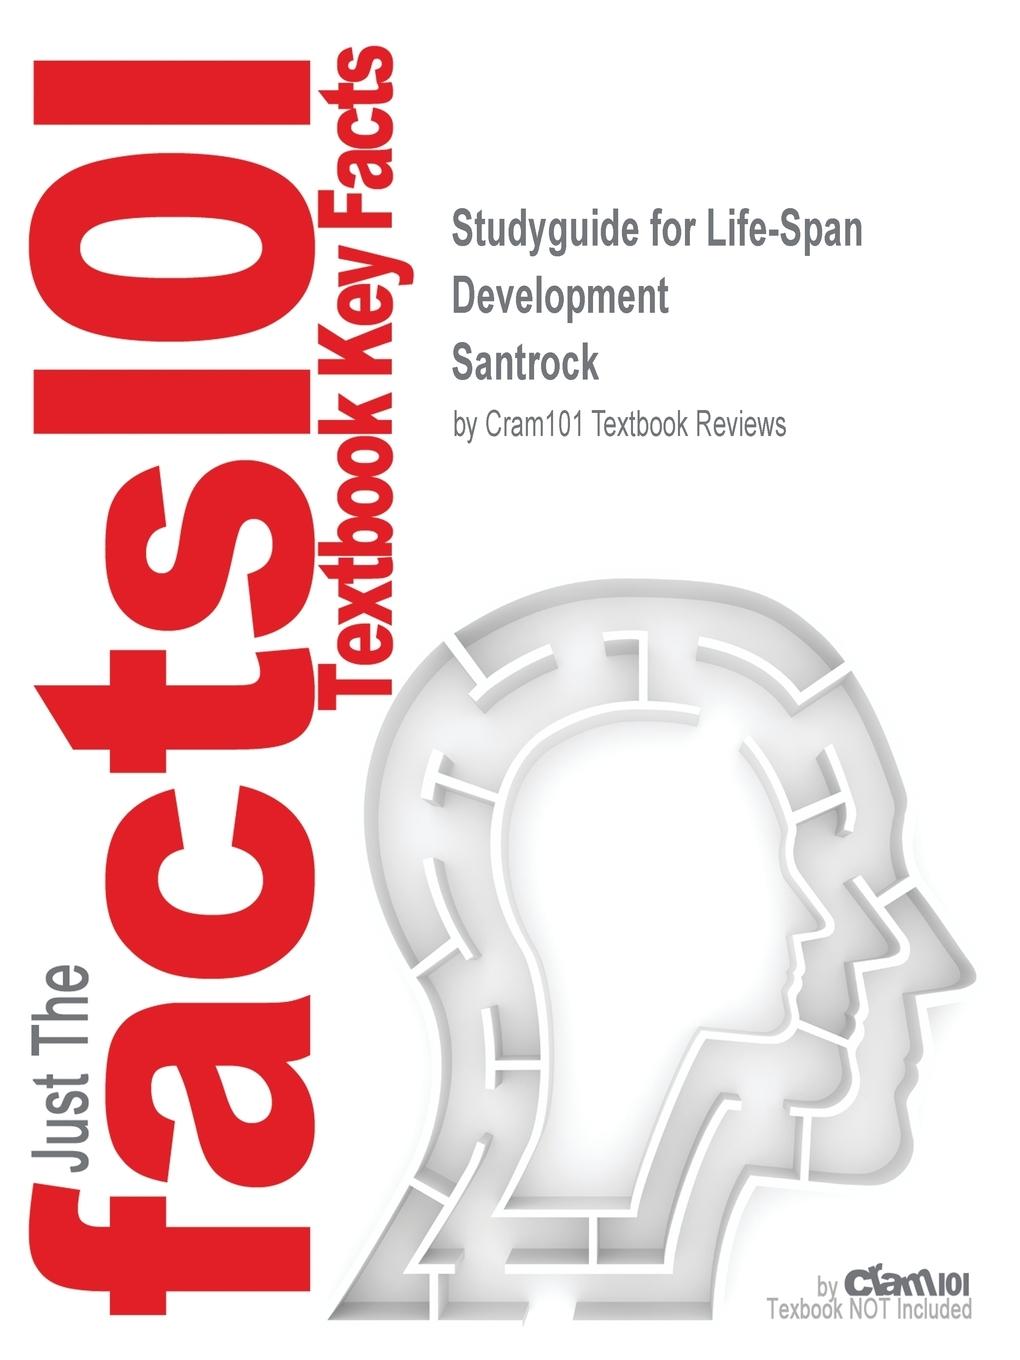 Studyguide for Life-Span Development by Santrock, ISBN 9780073531915 - Cram101 Textbook Reviews